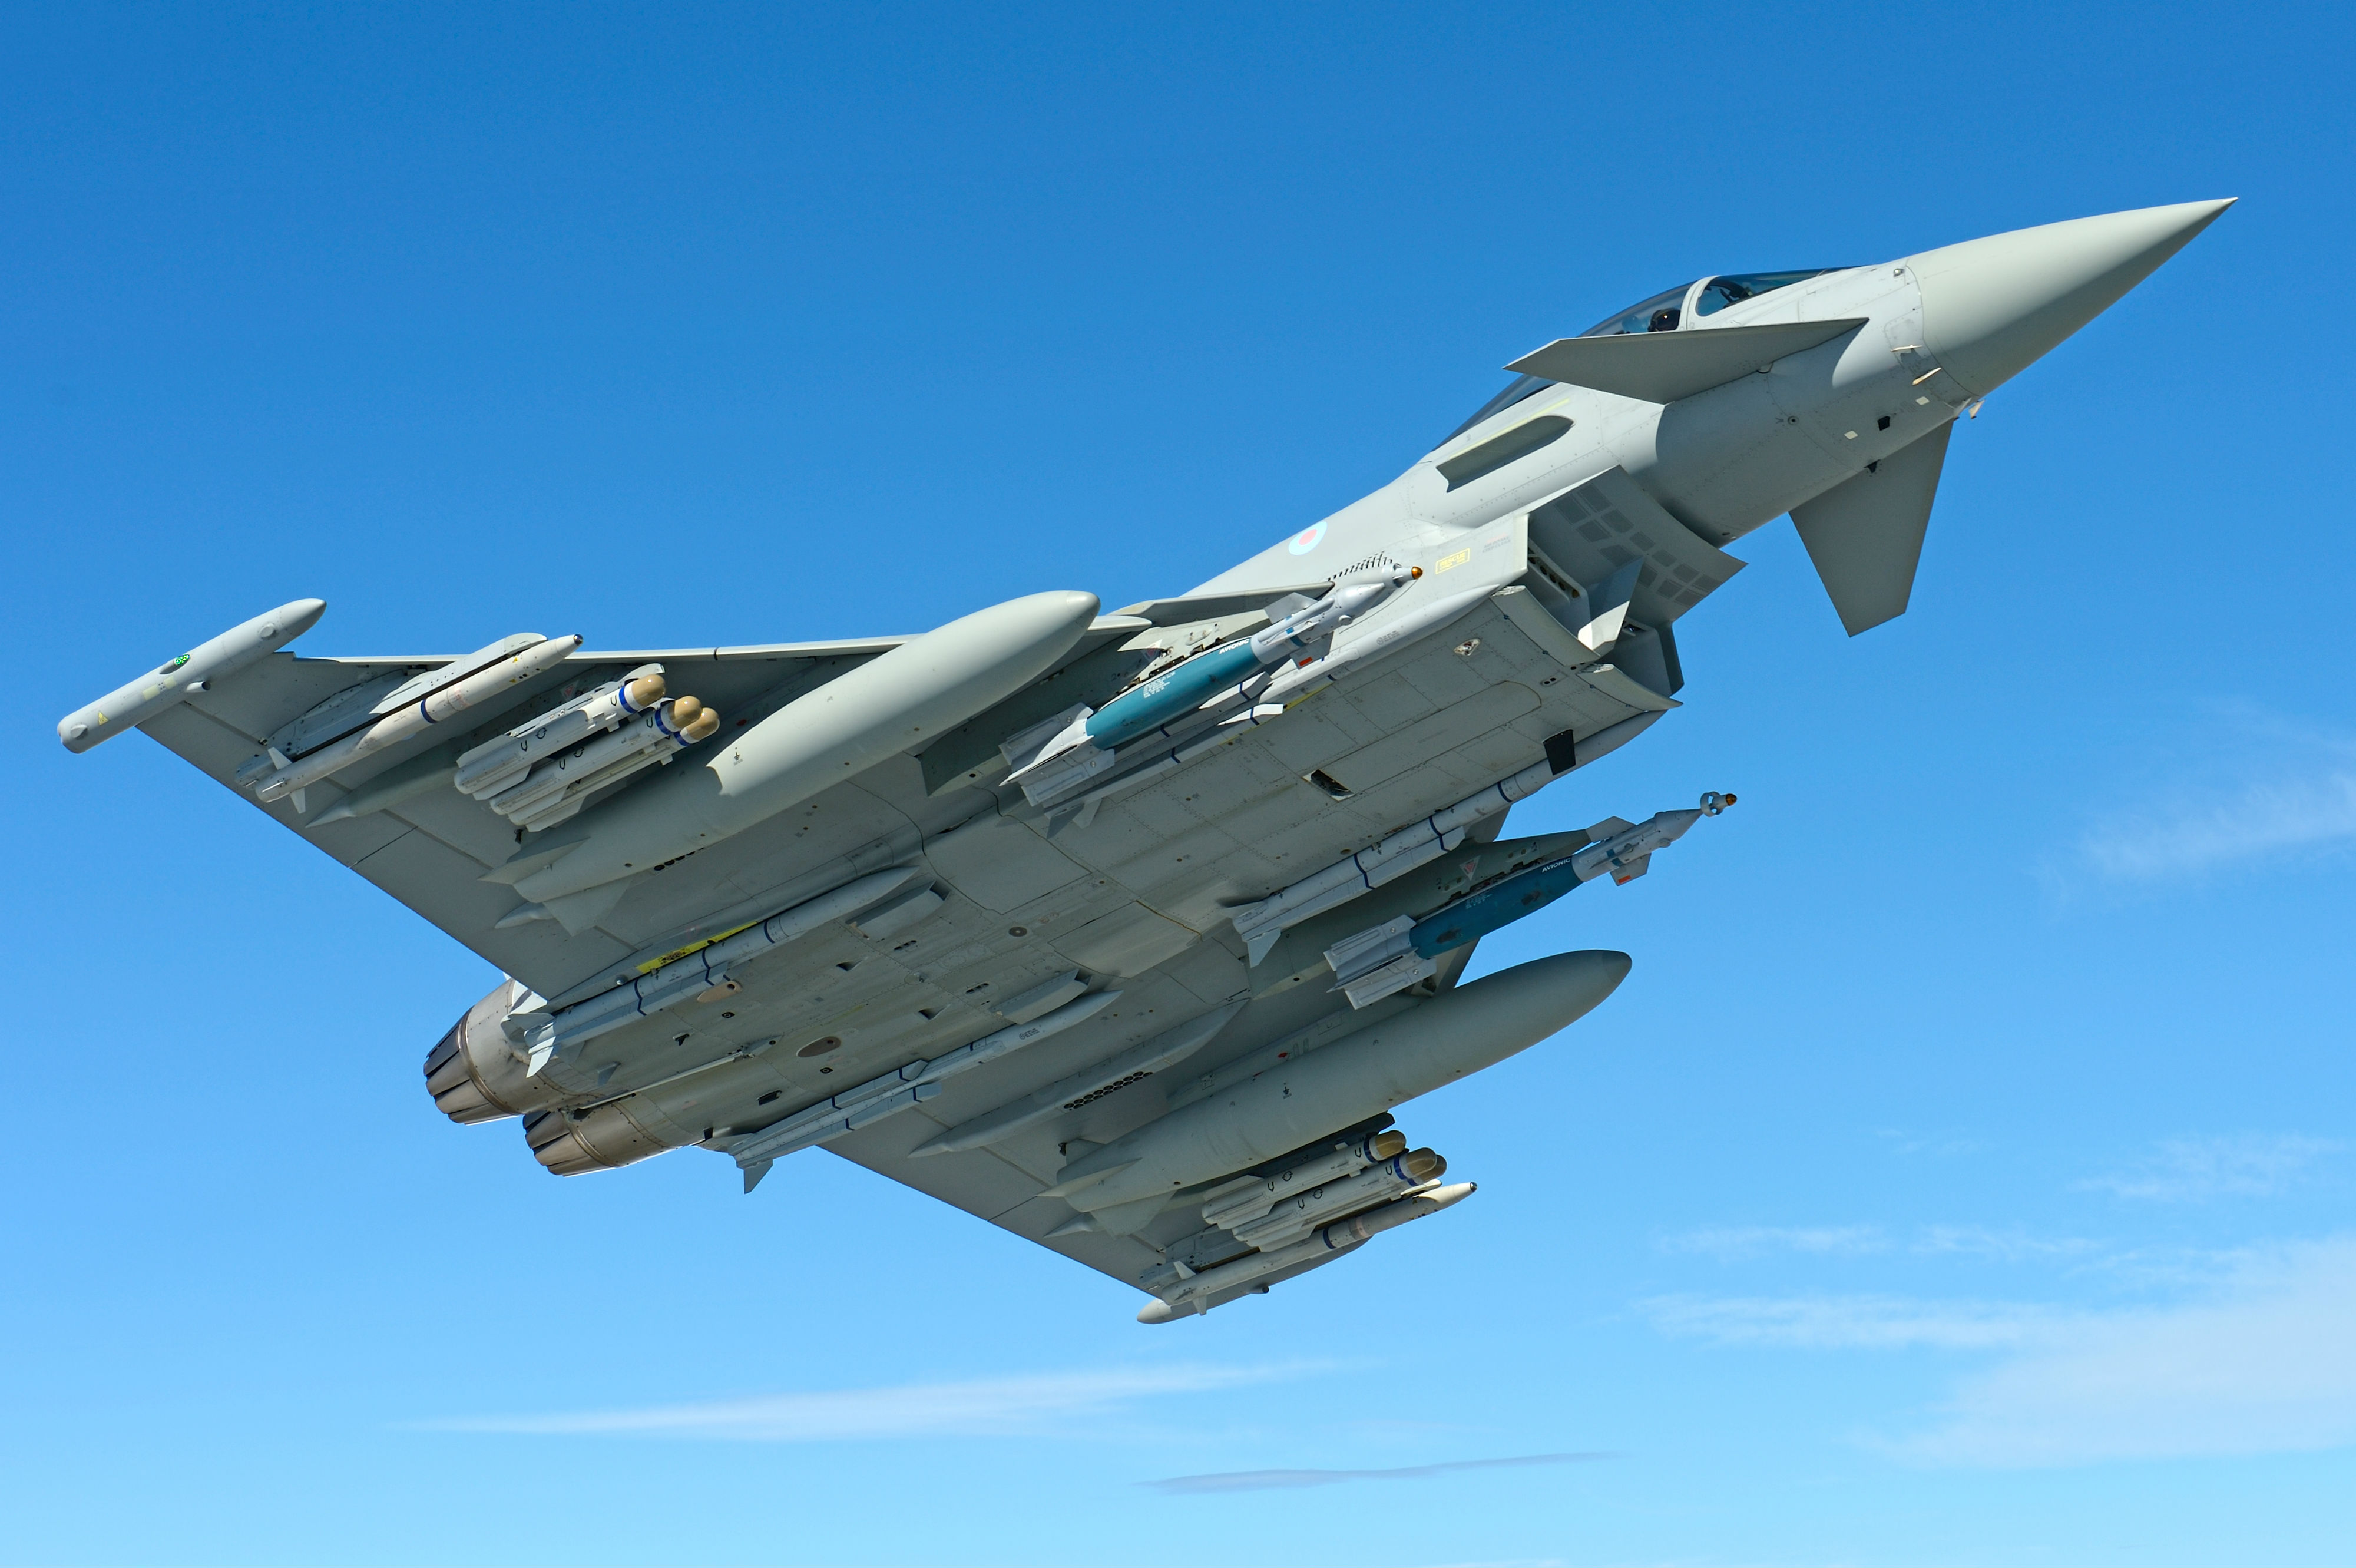 Eurofighter Typhoon Backgrounds, Compatible - PC, Mobile, Gadgets| 4000x2662 px